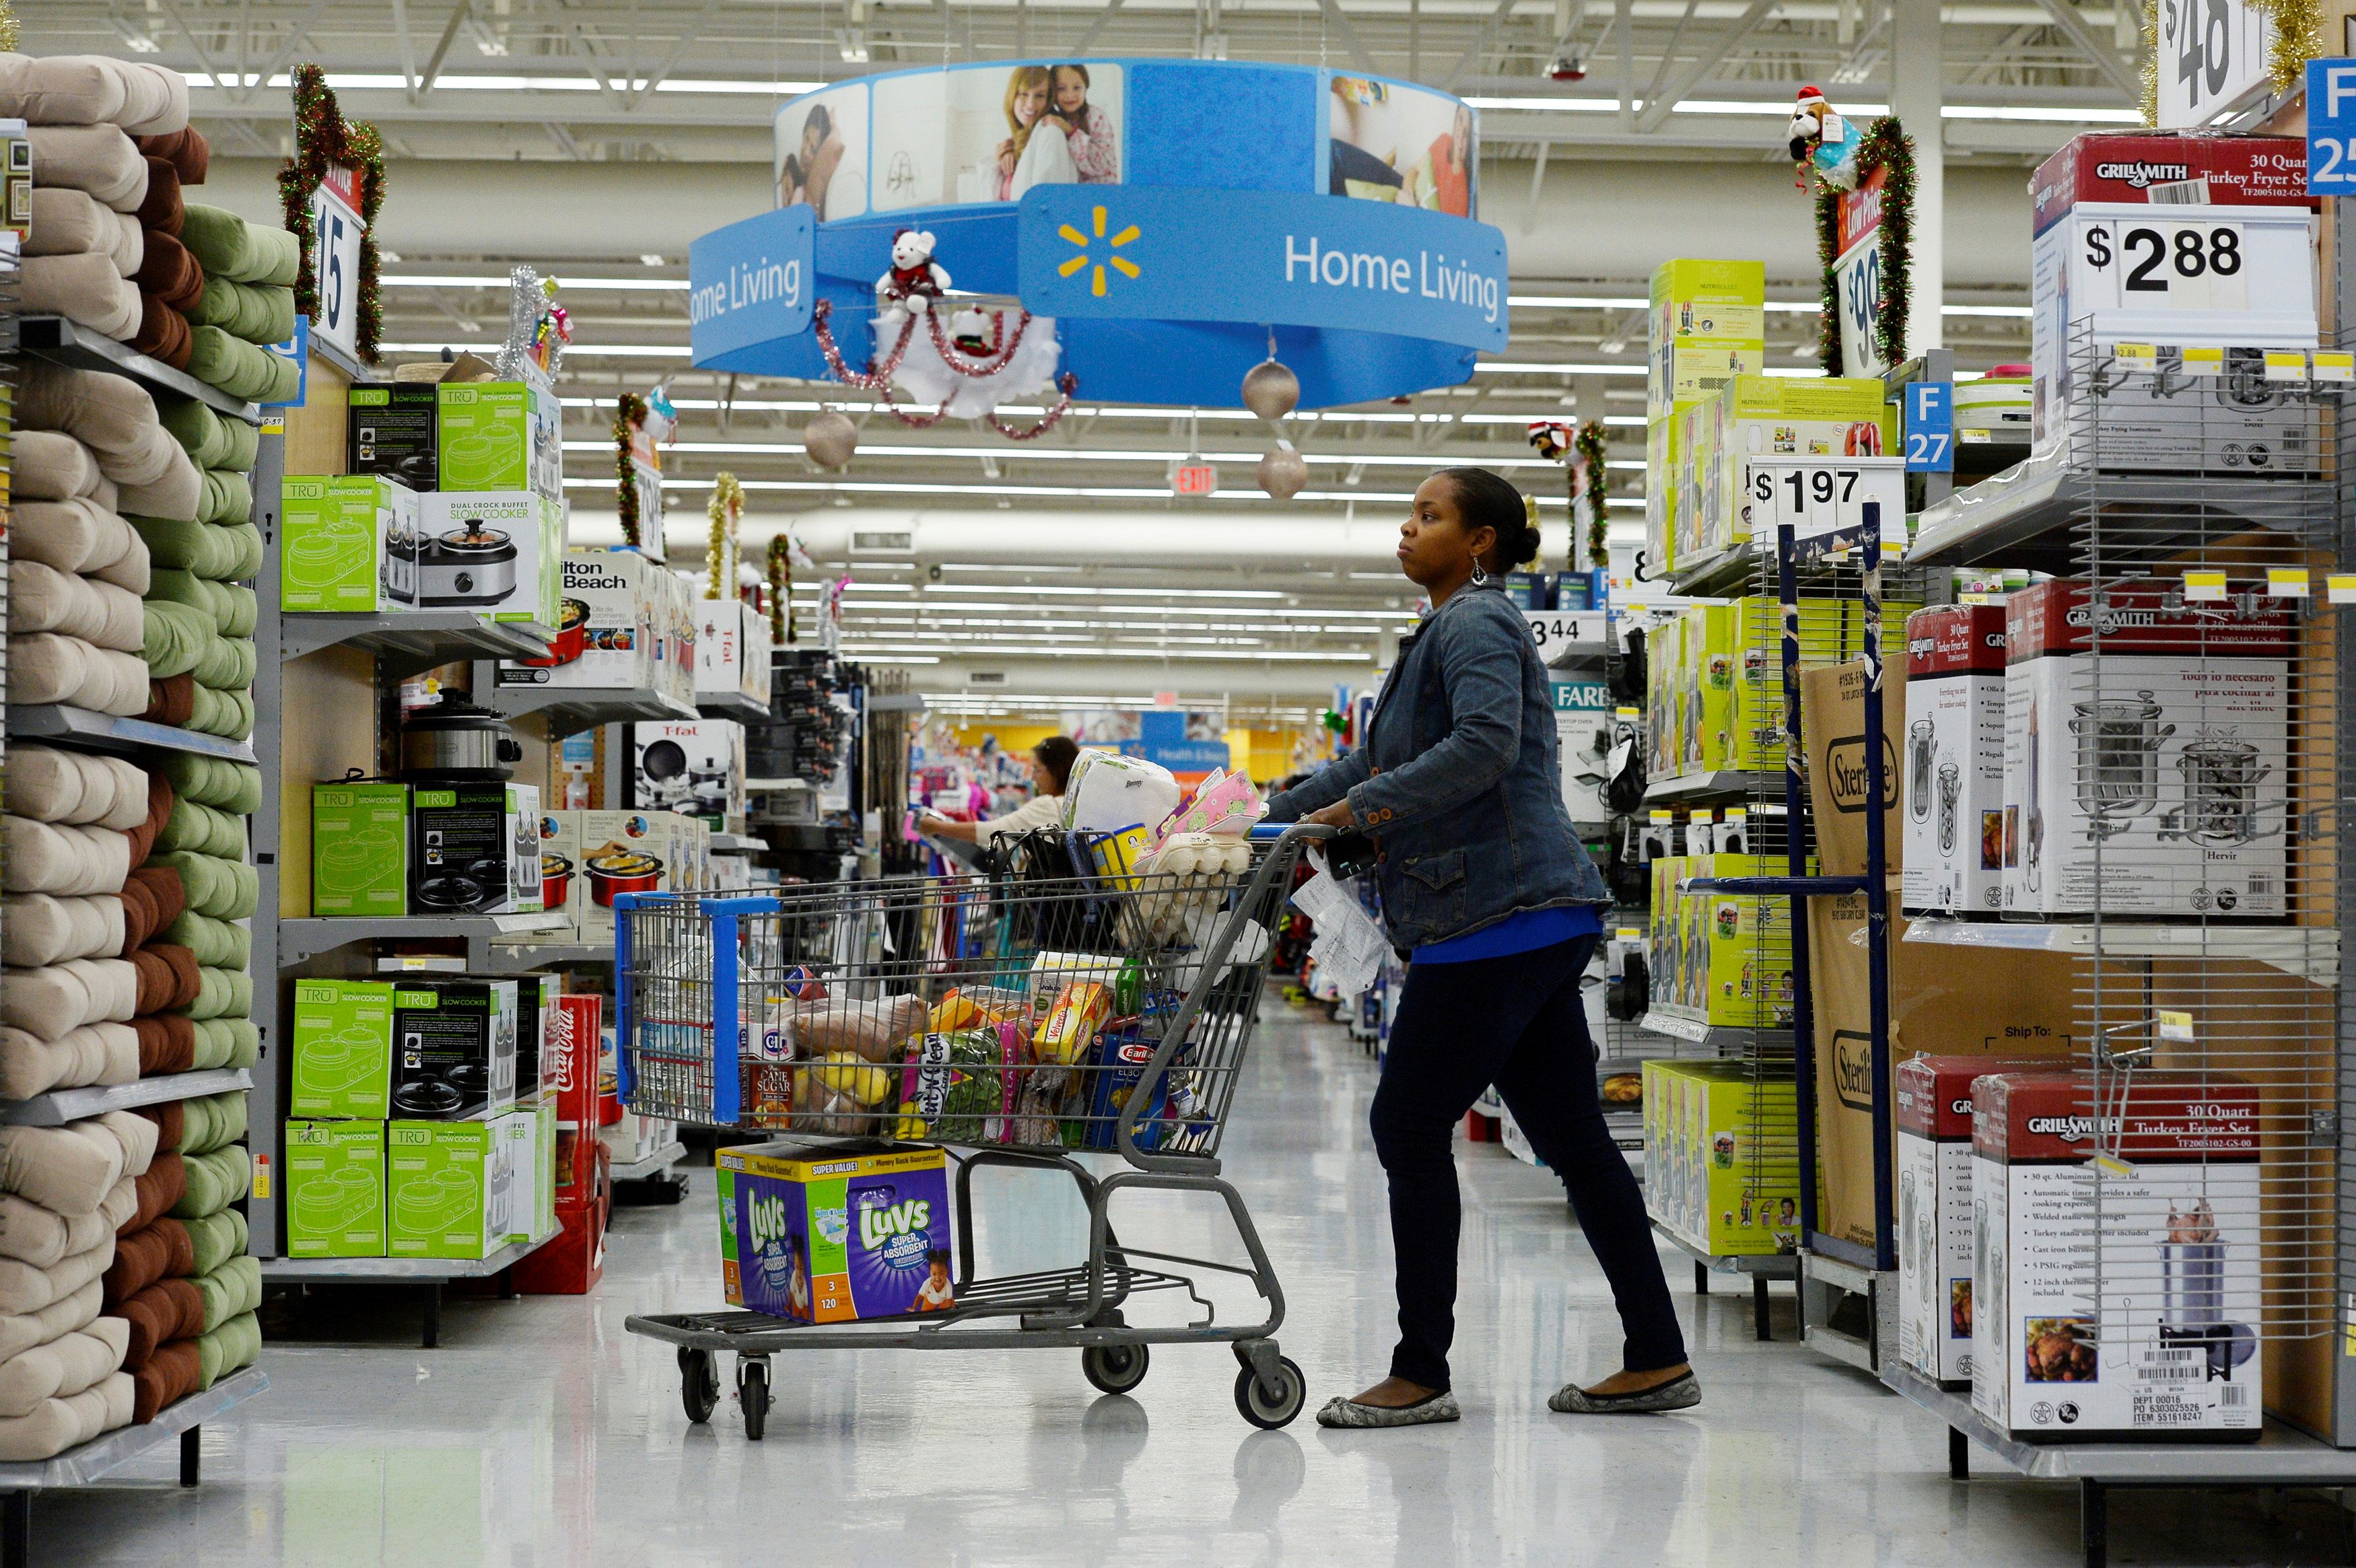 A customer pushes her cart through the aisles of a Walmart store in the Porter Ranch neighborhood of Los Angeles, November 26, 2013. REUTERS / Kevork Djansezian